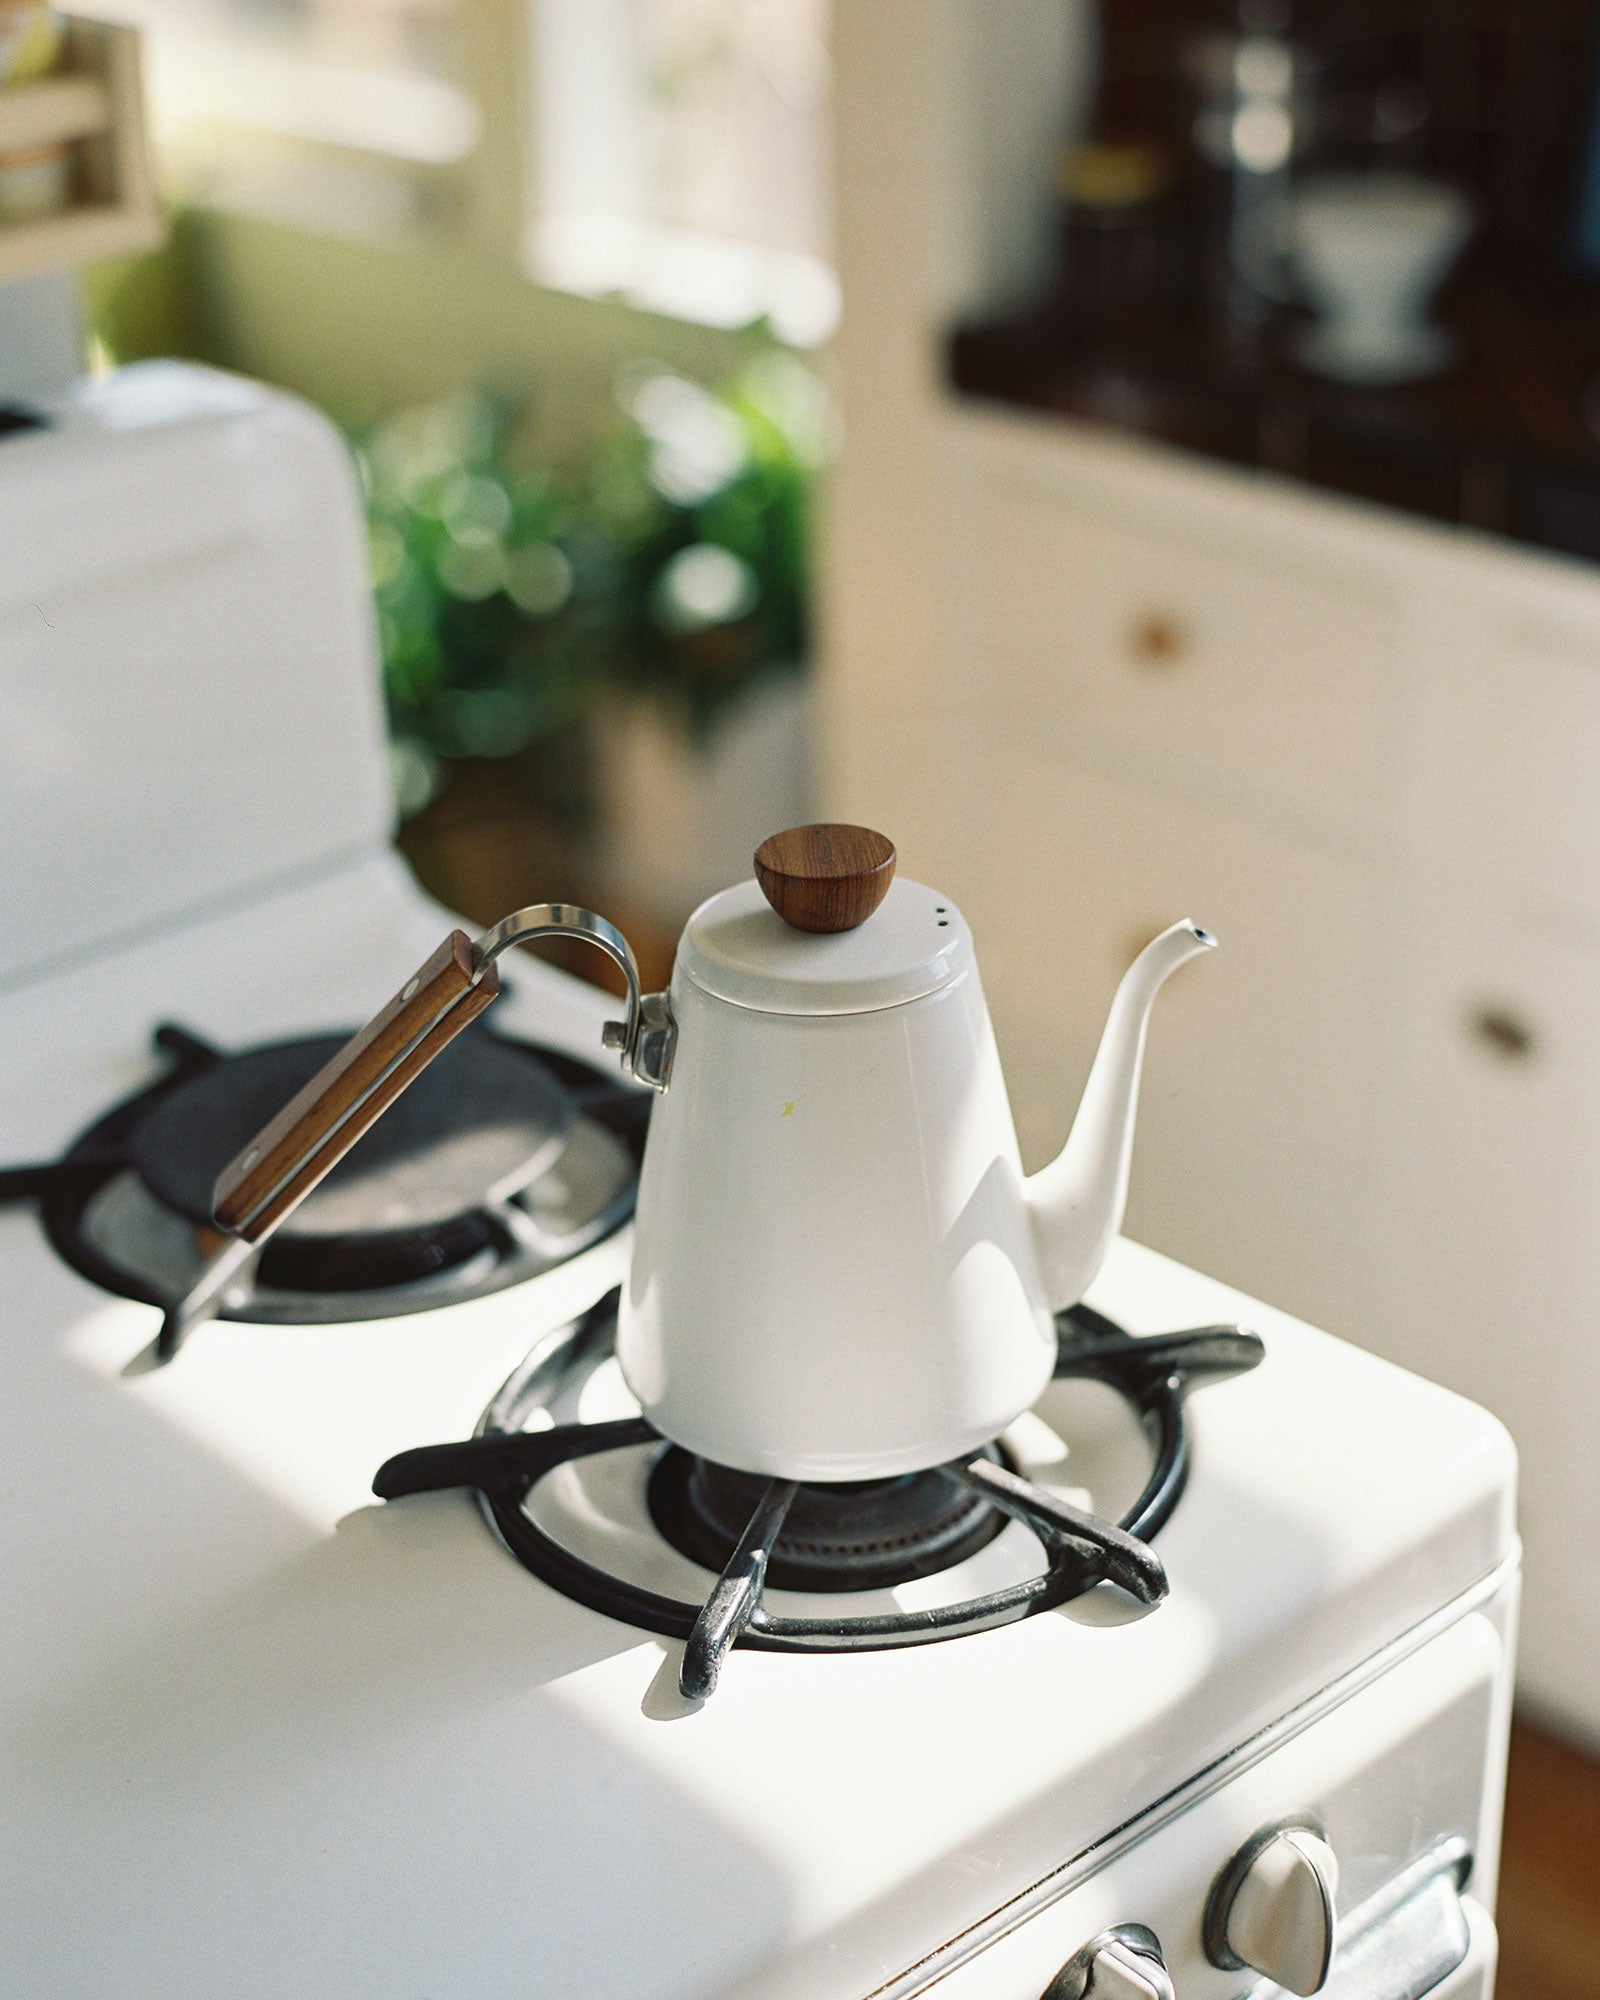 A white enamel kettle by Bona with a wooden handle